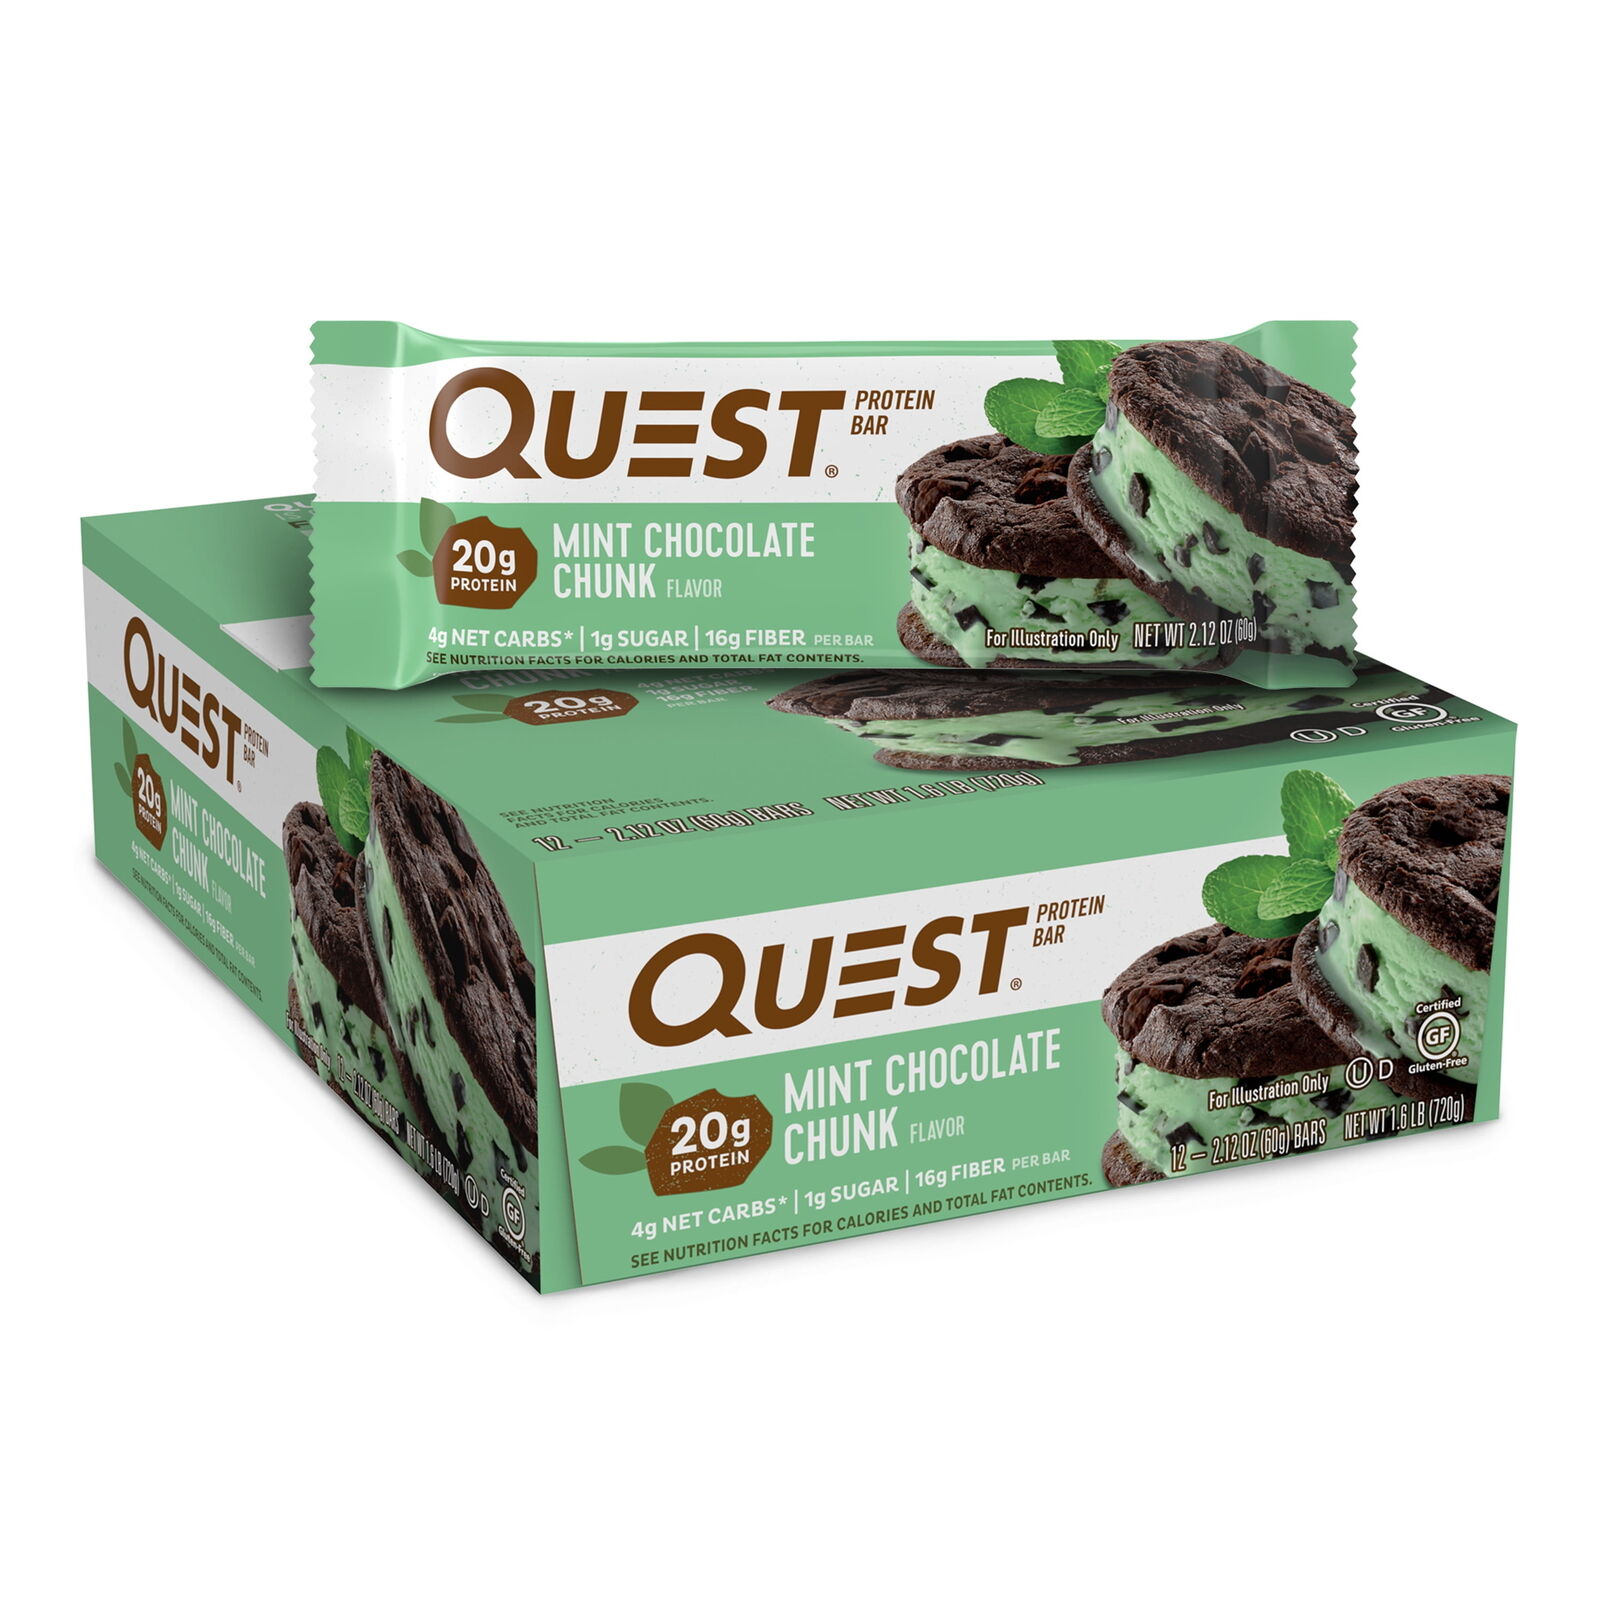 25-best-quest-protein-bars-nutrition-facts